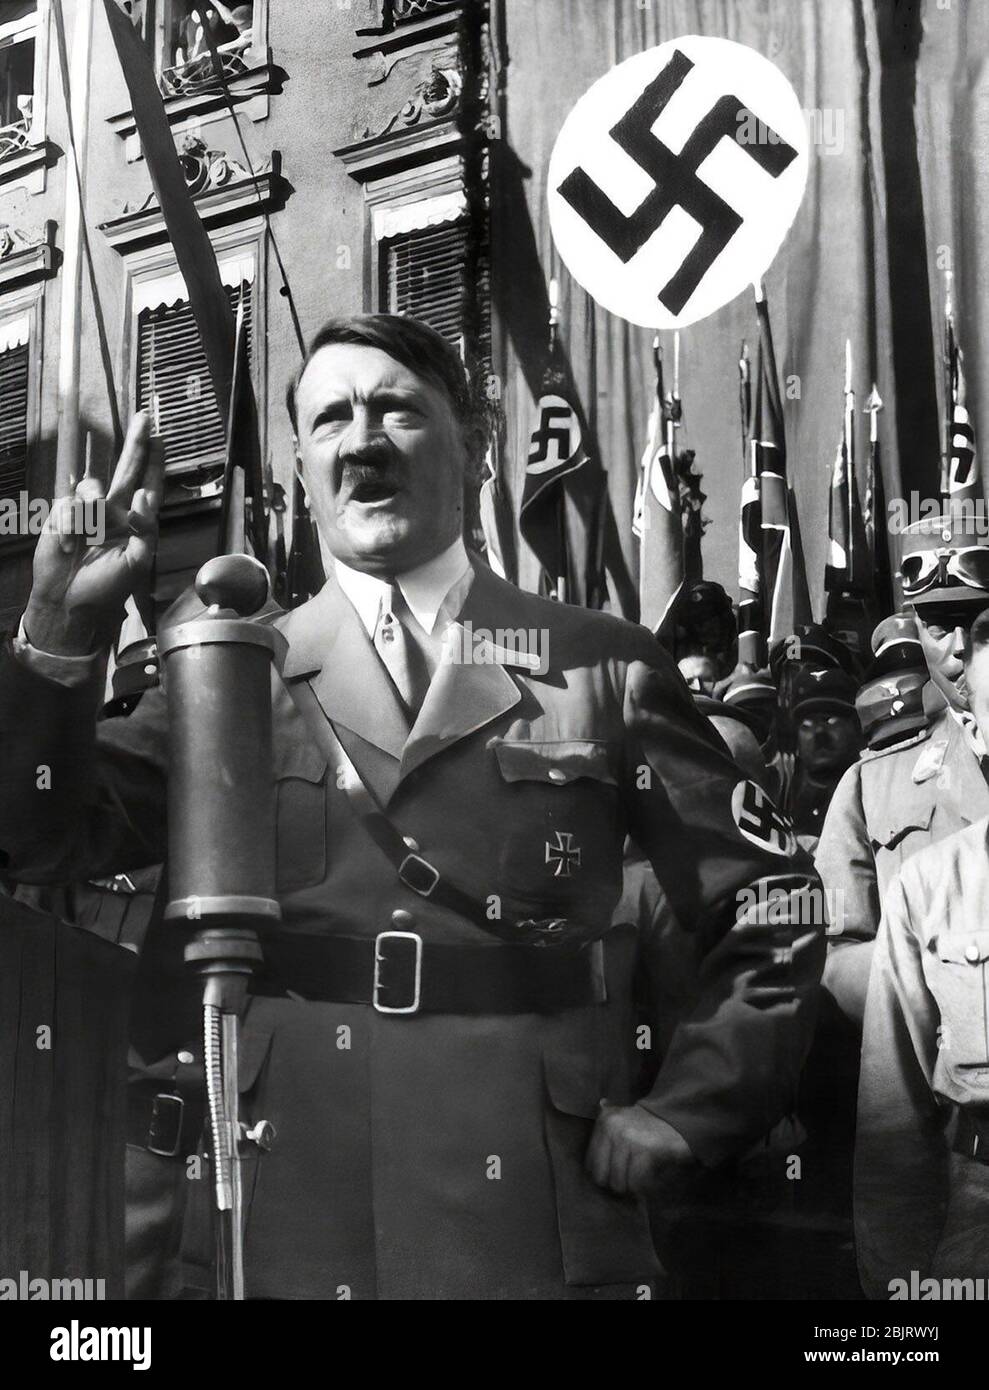 Adolf Hitler addresses crowds in his speech in Germany Stock Photo